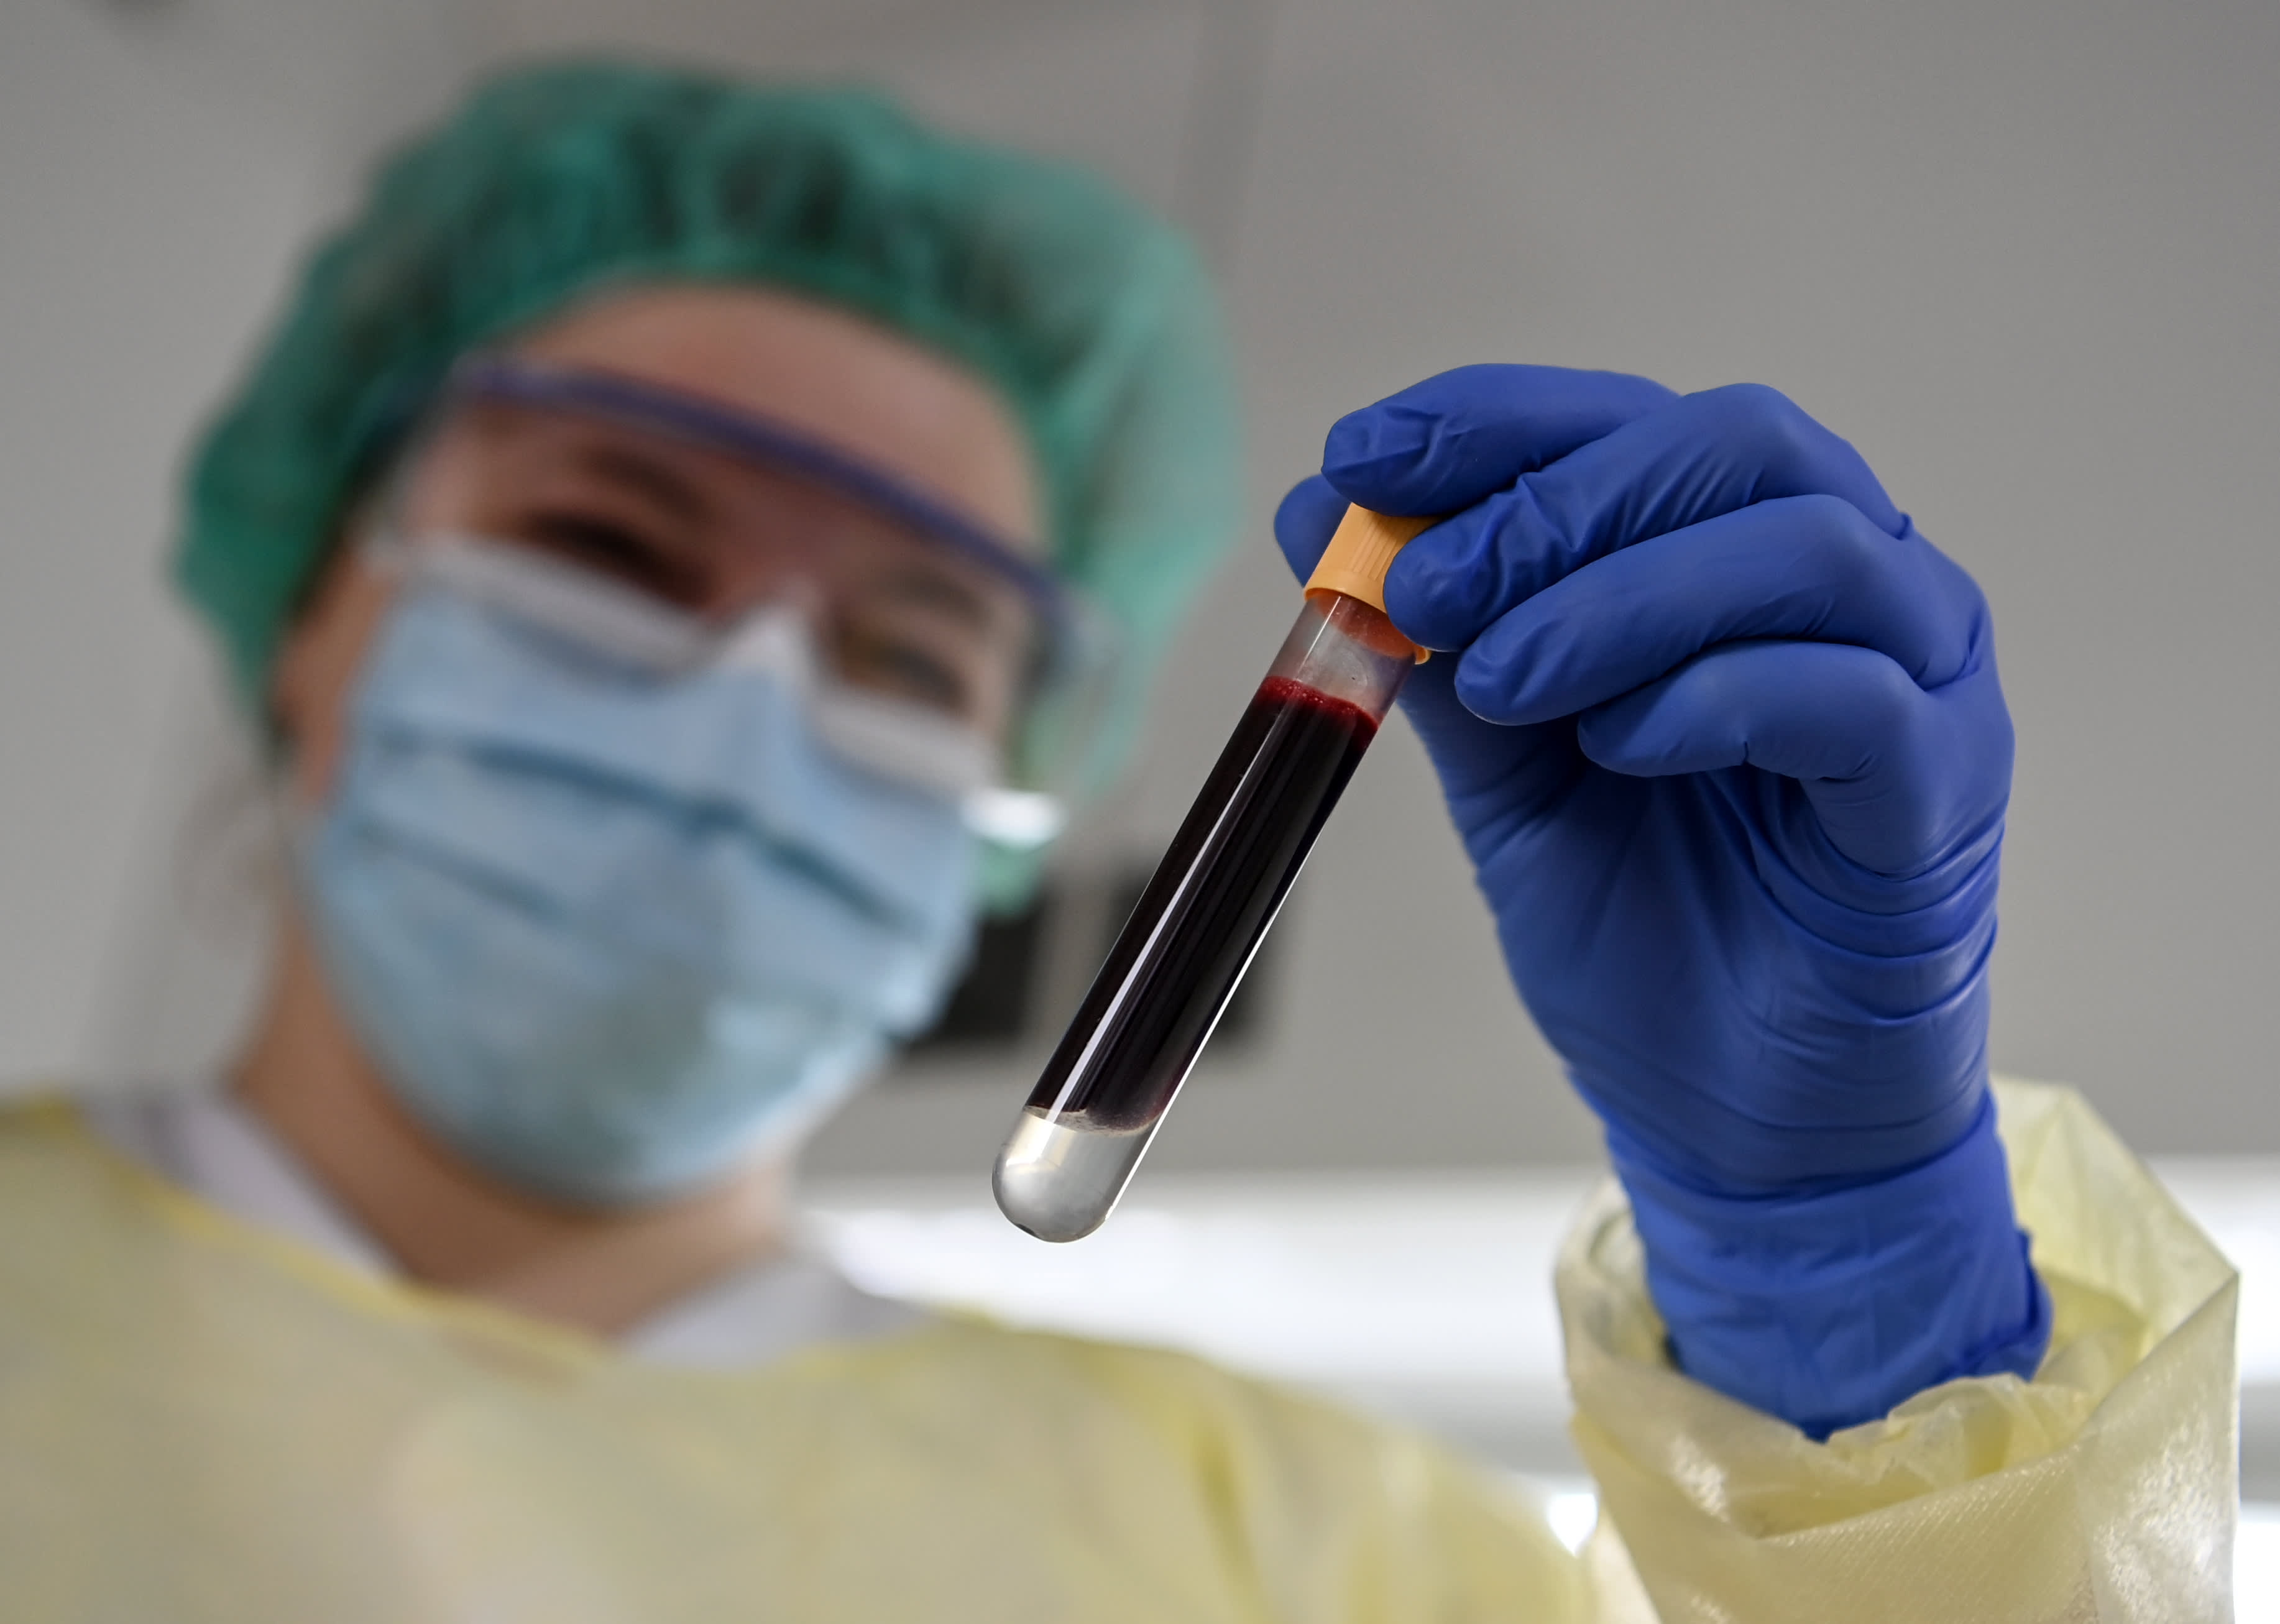 Theranos is history, but big blood testing breakthroughs are coming post-Covid